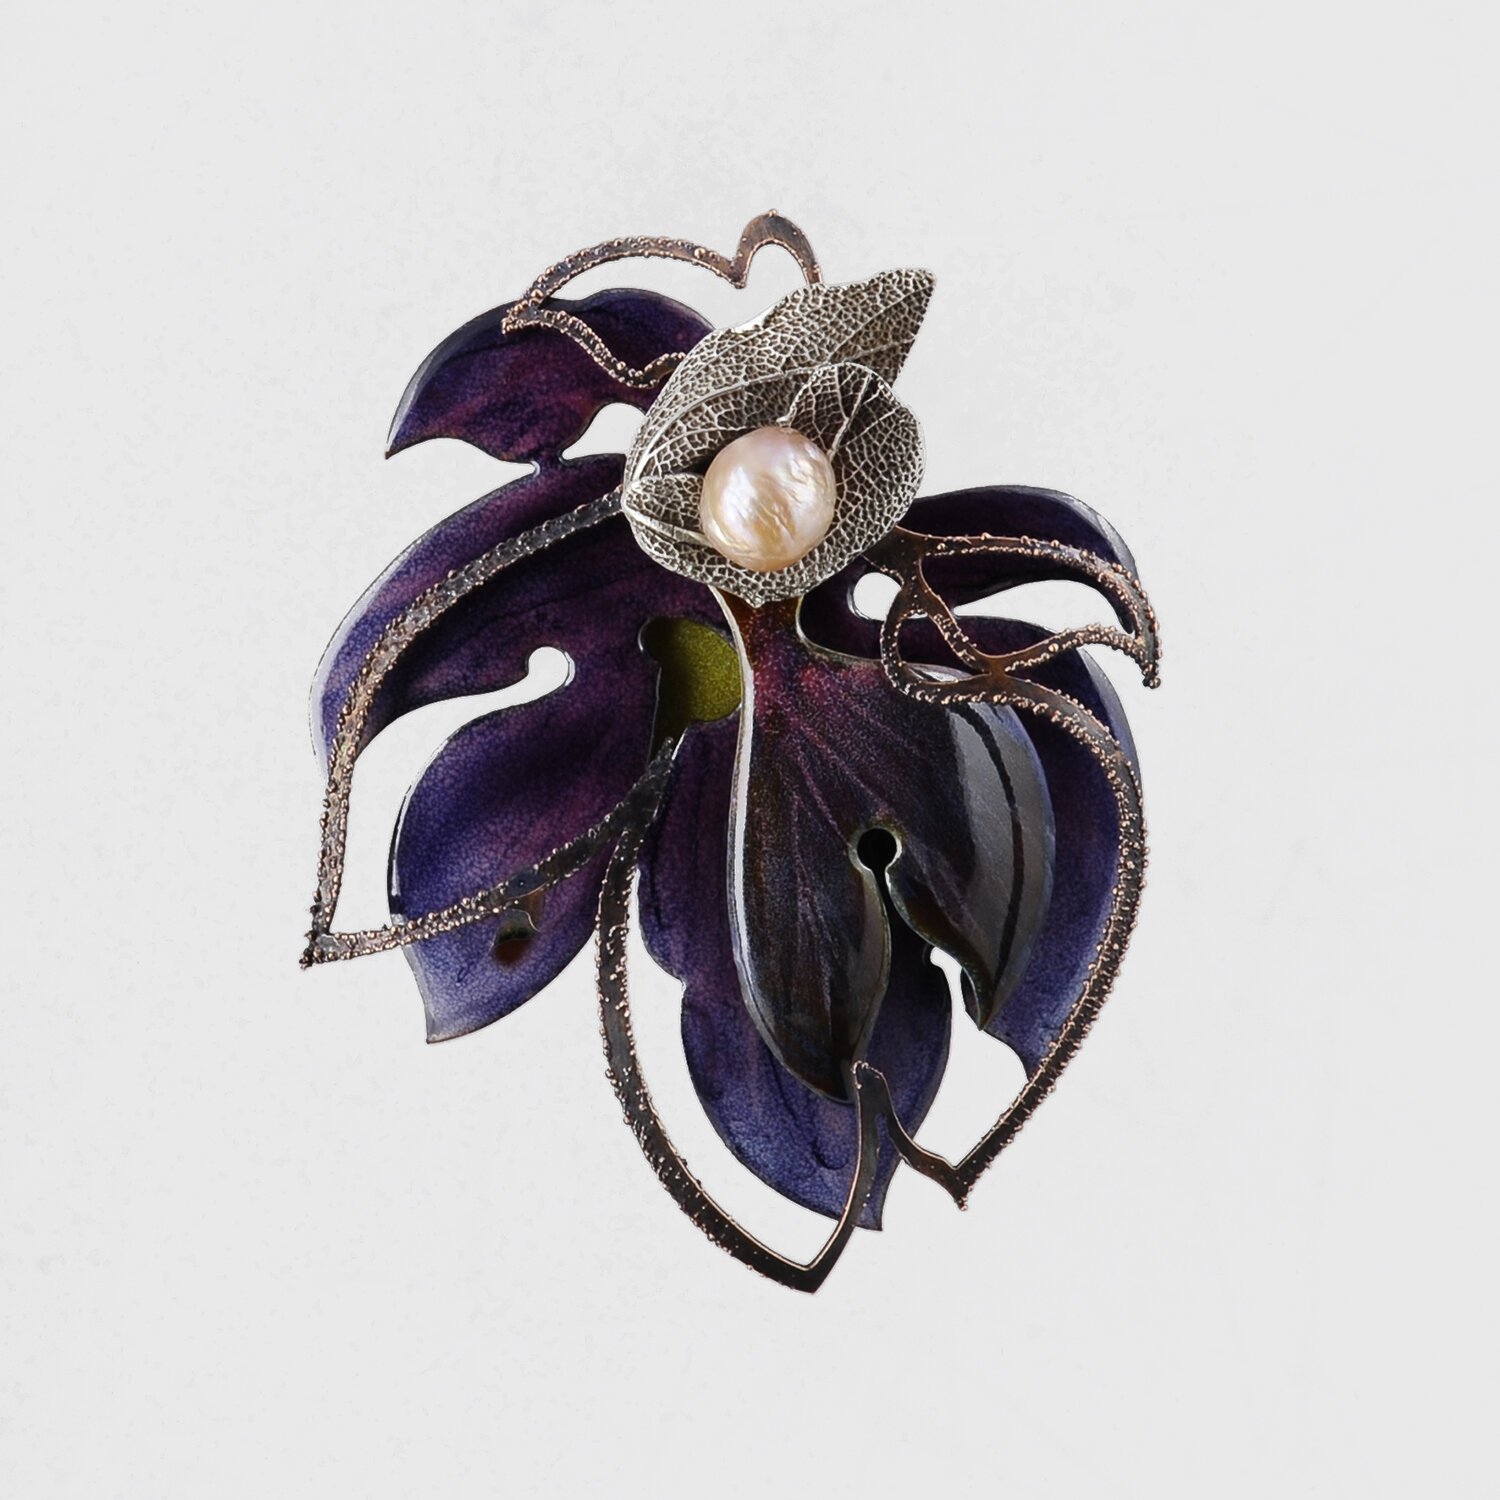 Blue Violet Rosette Brooch RB118     |     2018     |     silver, copper, pearl, enamel     |     3.75 x 3 x .75 inches